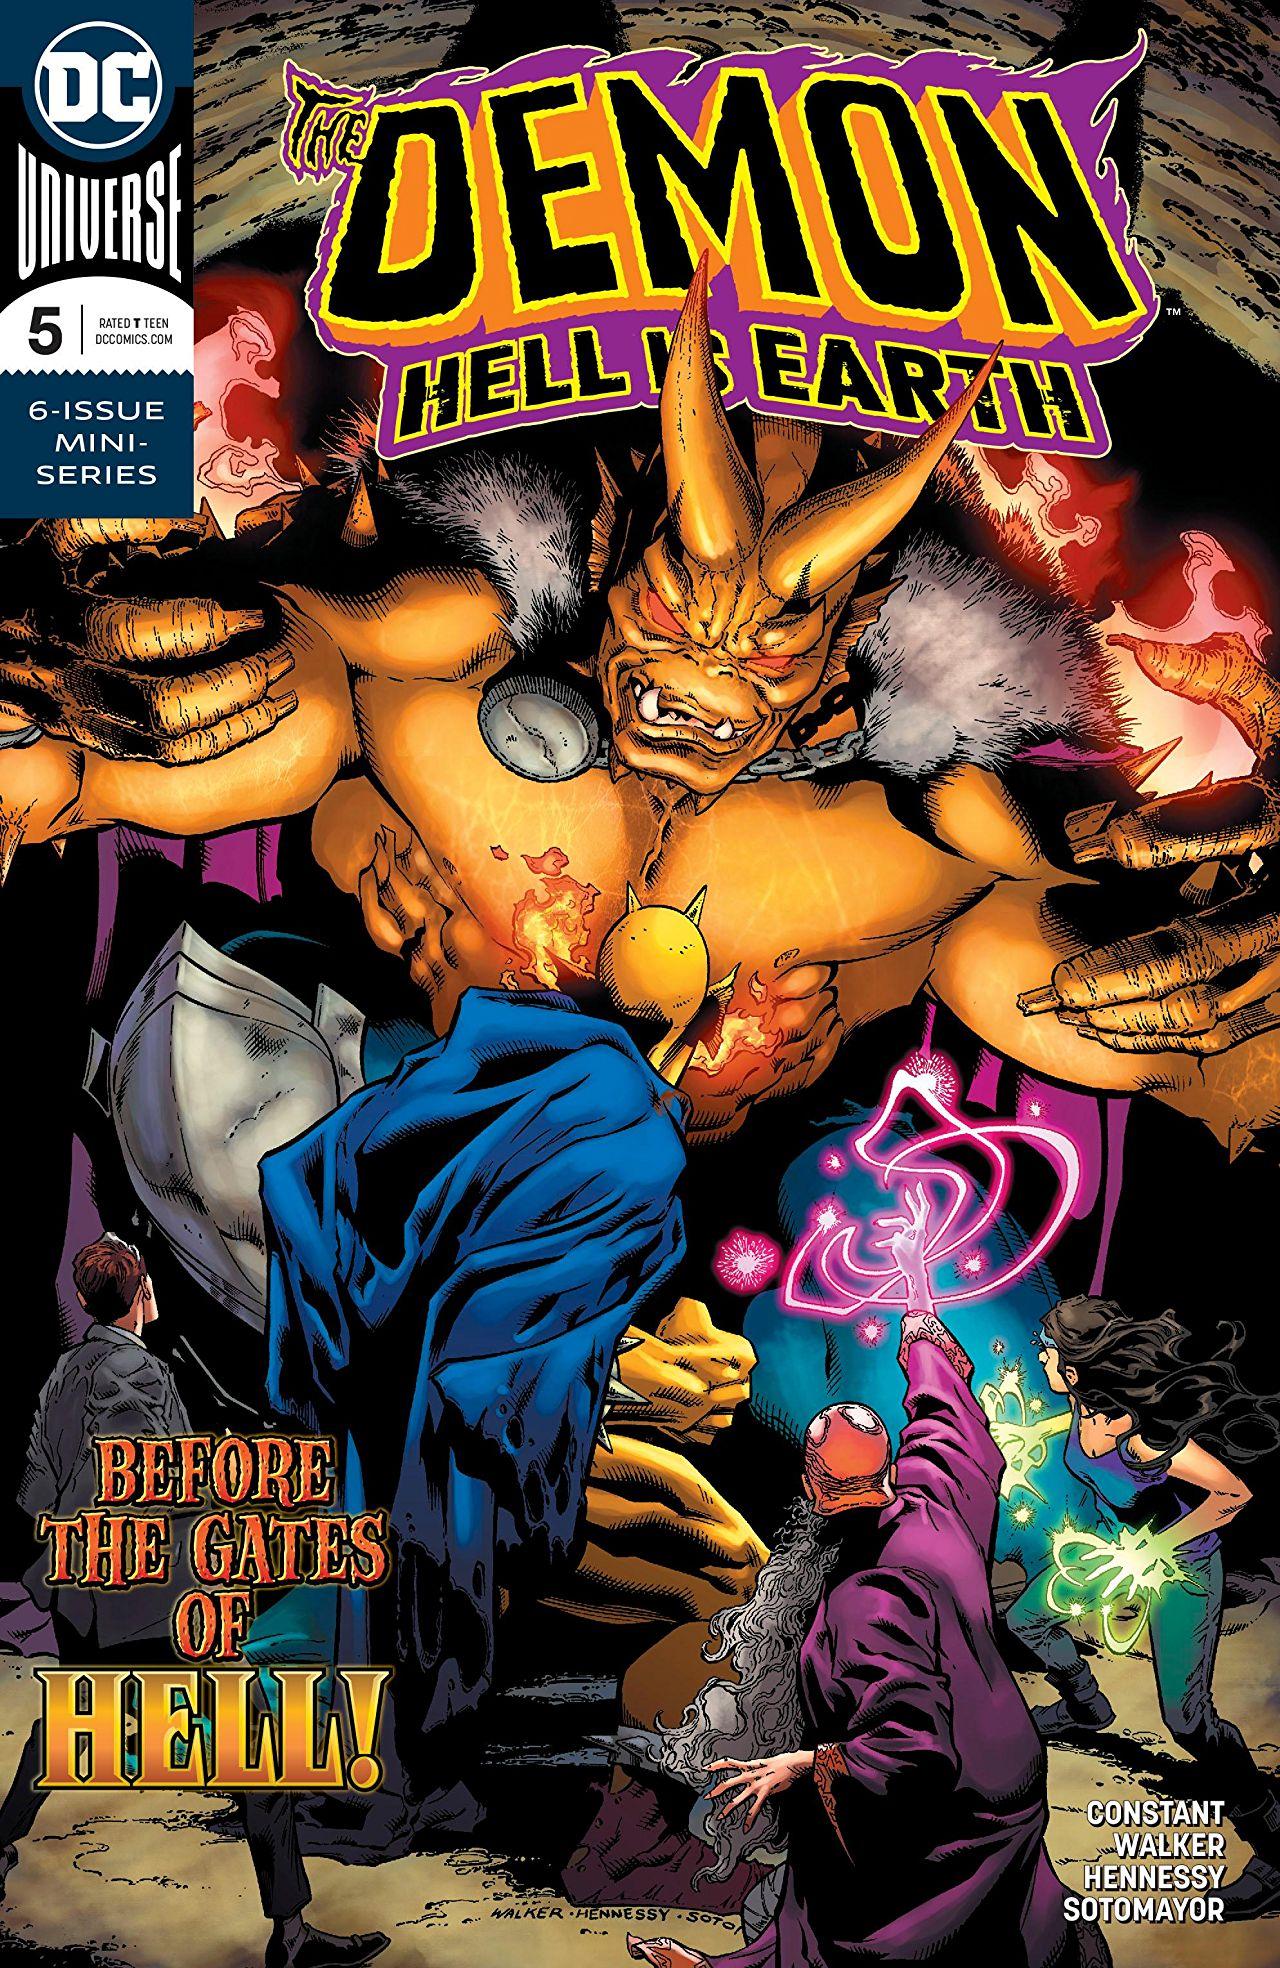 The Demon: Hell Is Earth Vol. 1 #5